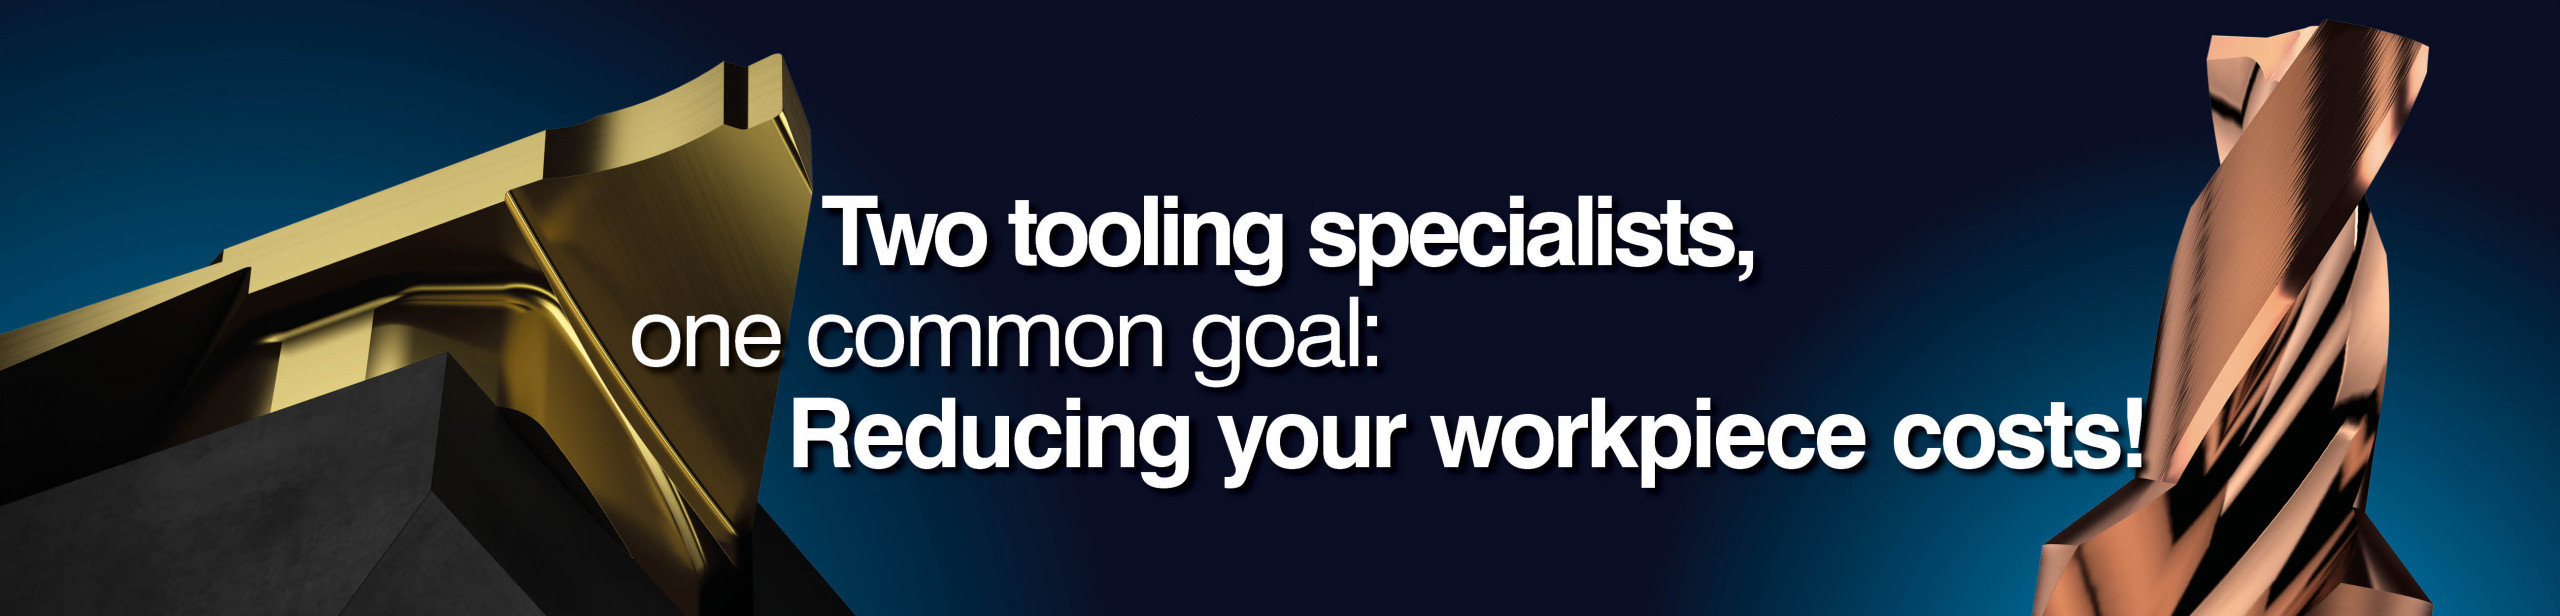 Two tooling specialists, one common goal: Reducing your workpiece costs!